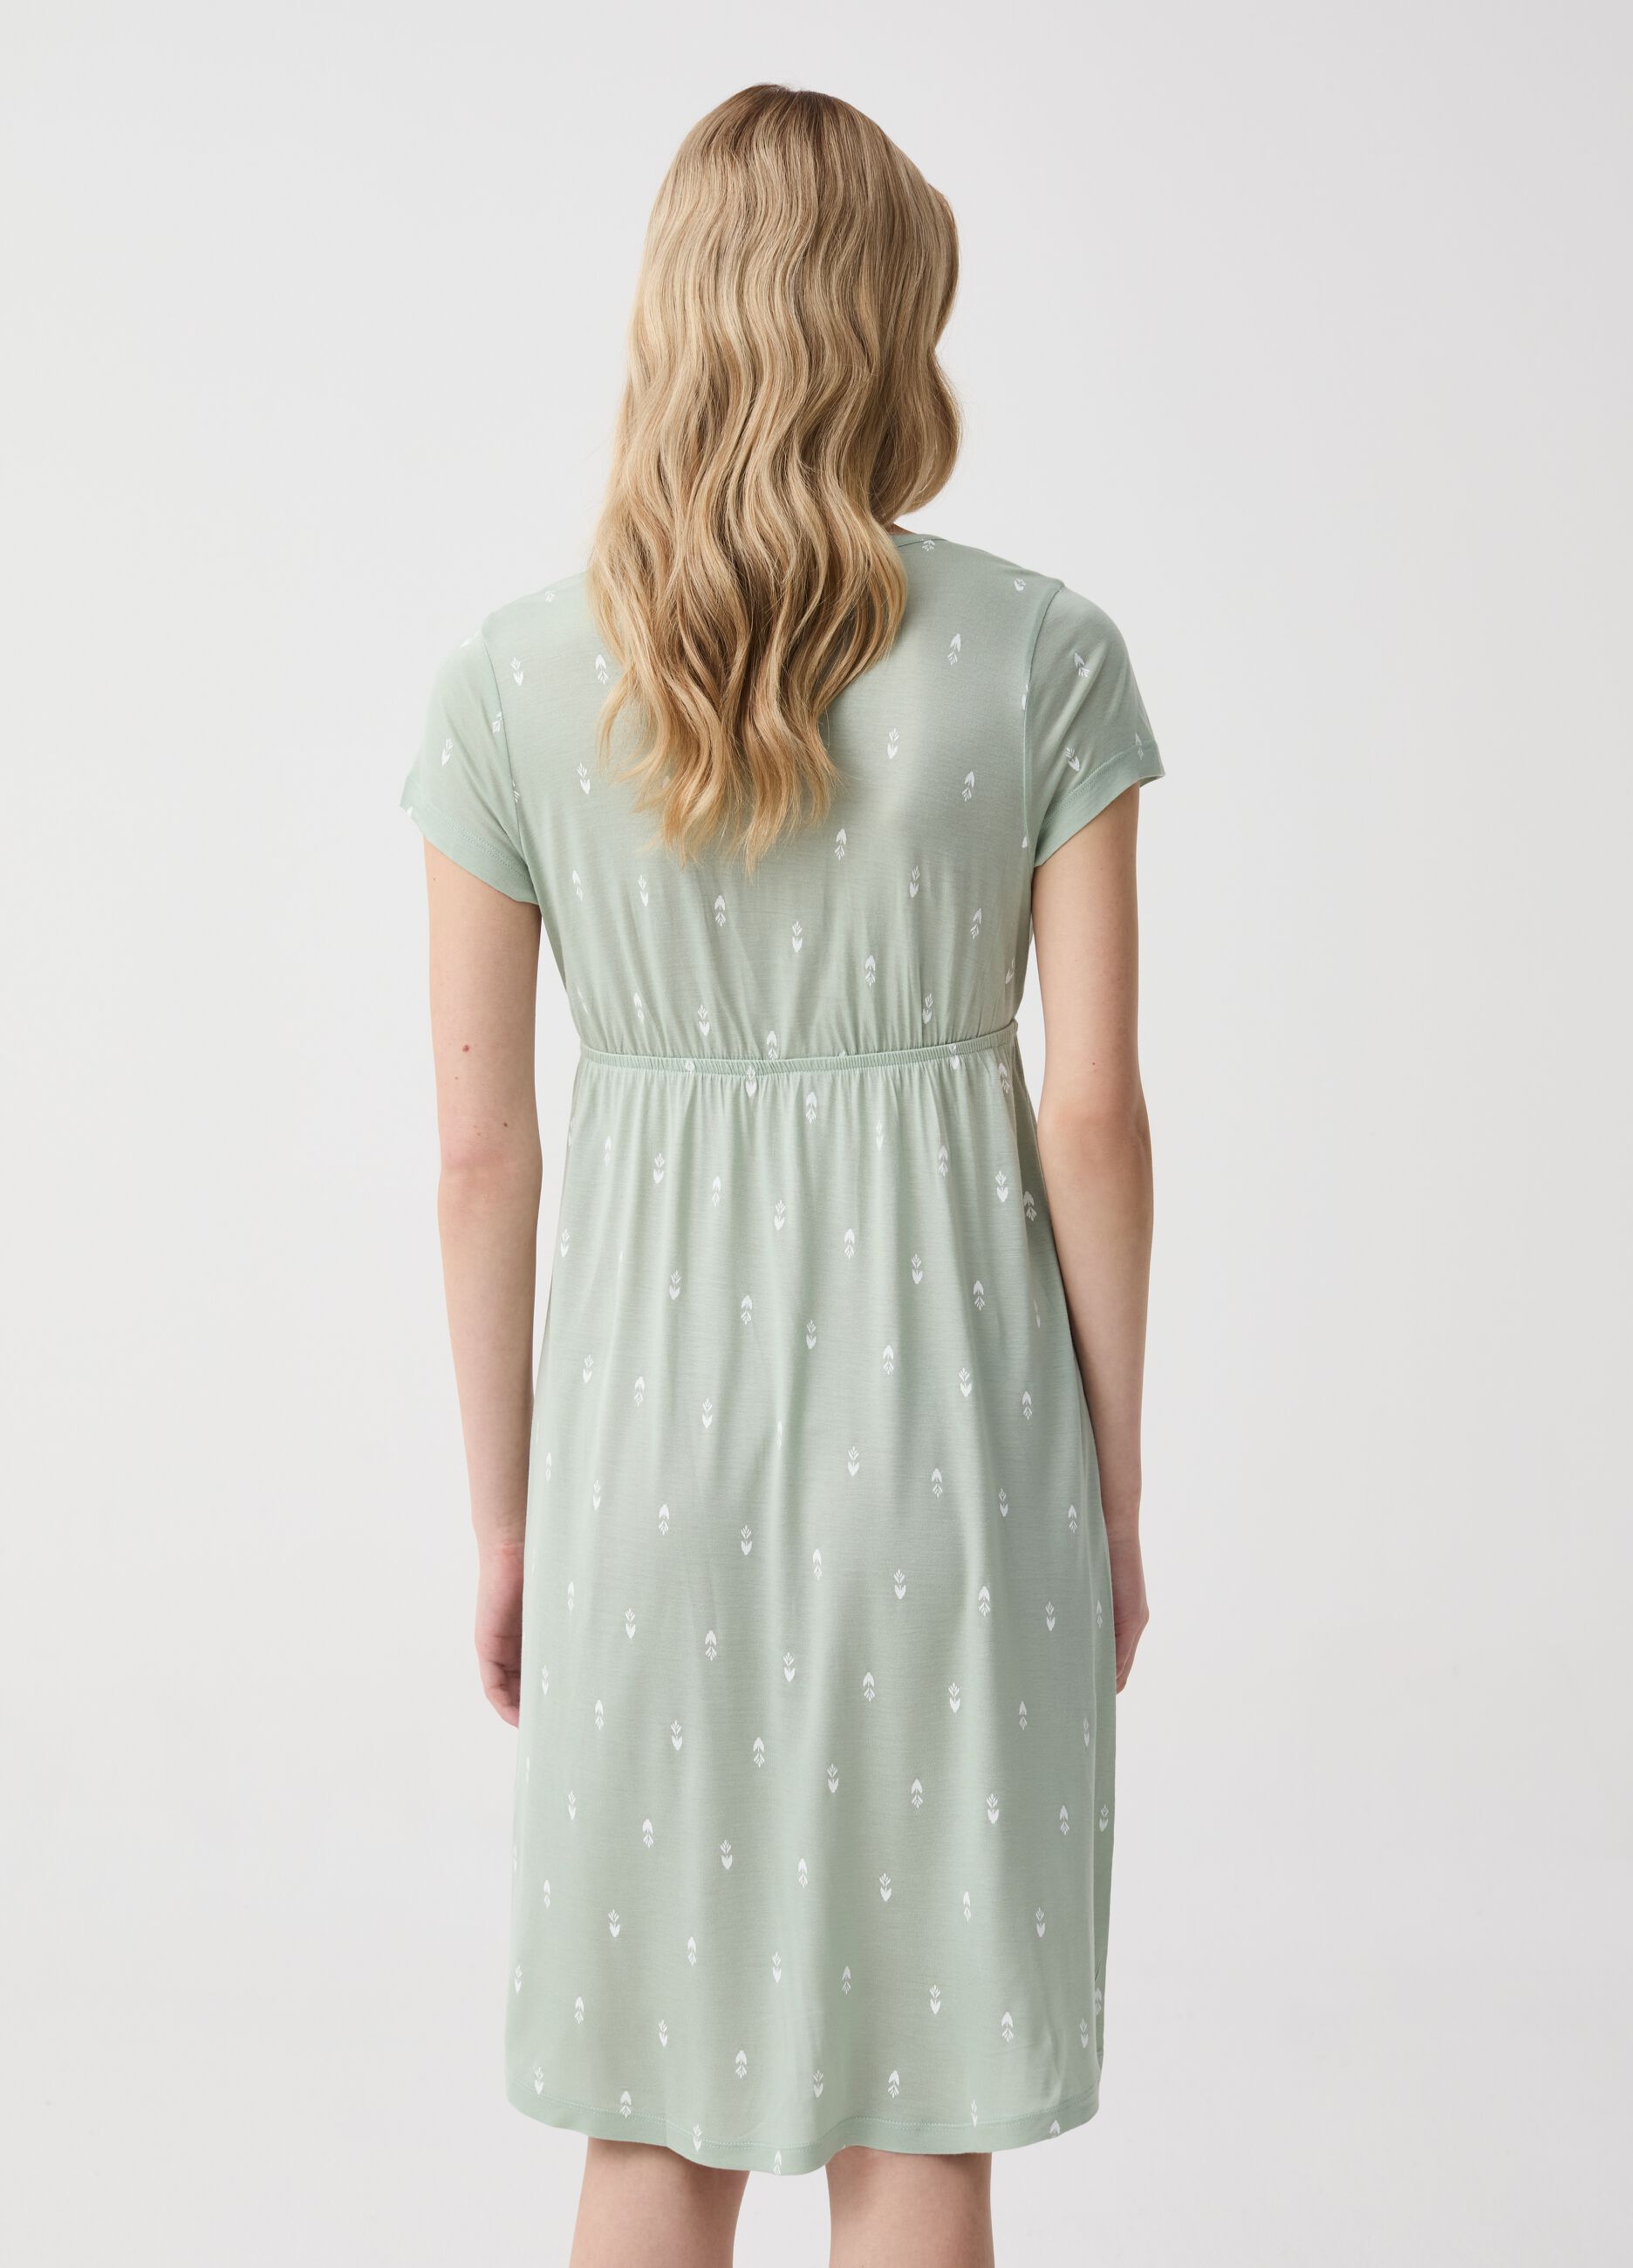 Empire-style nightdress with print